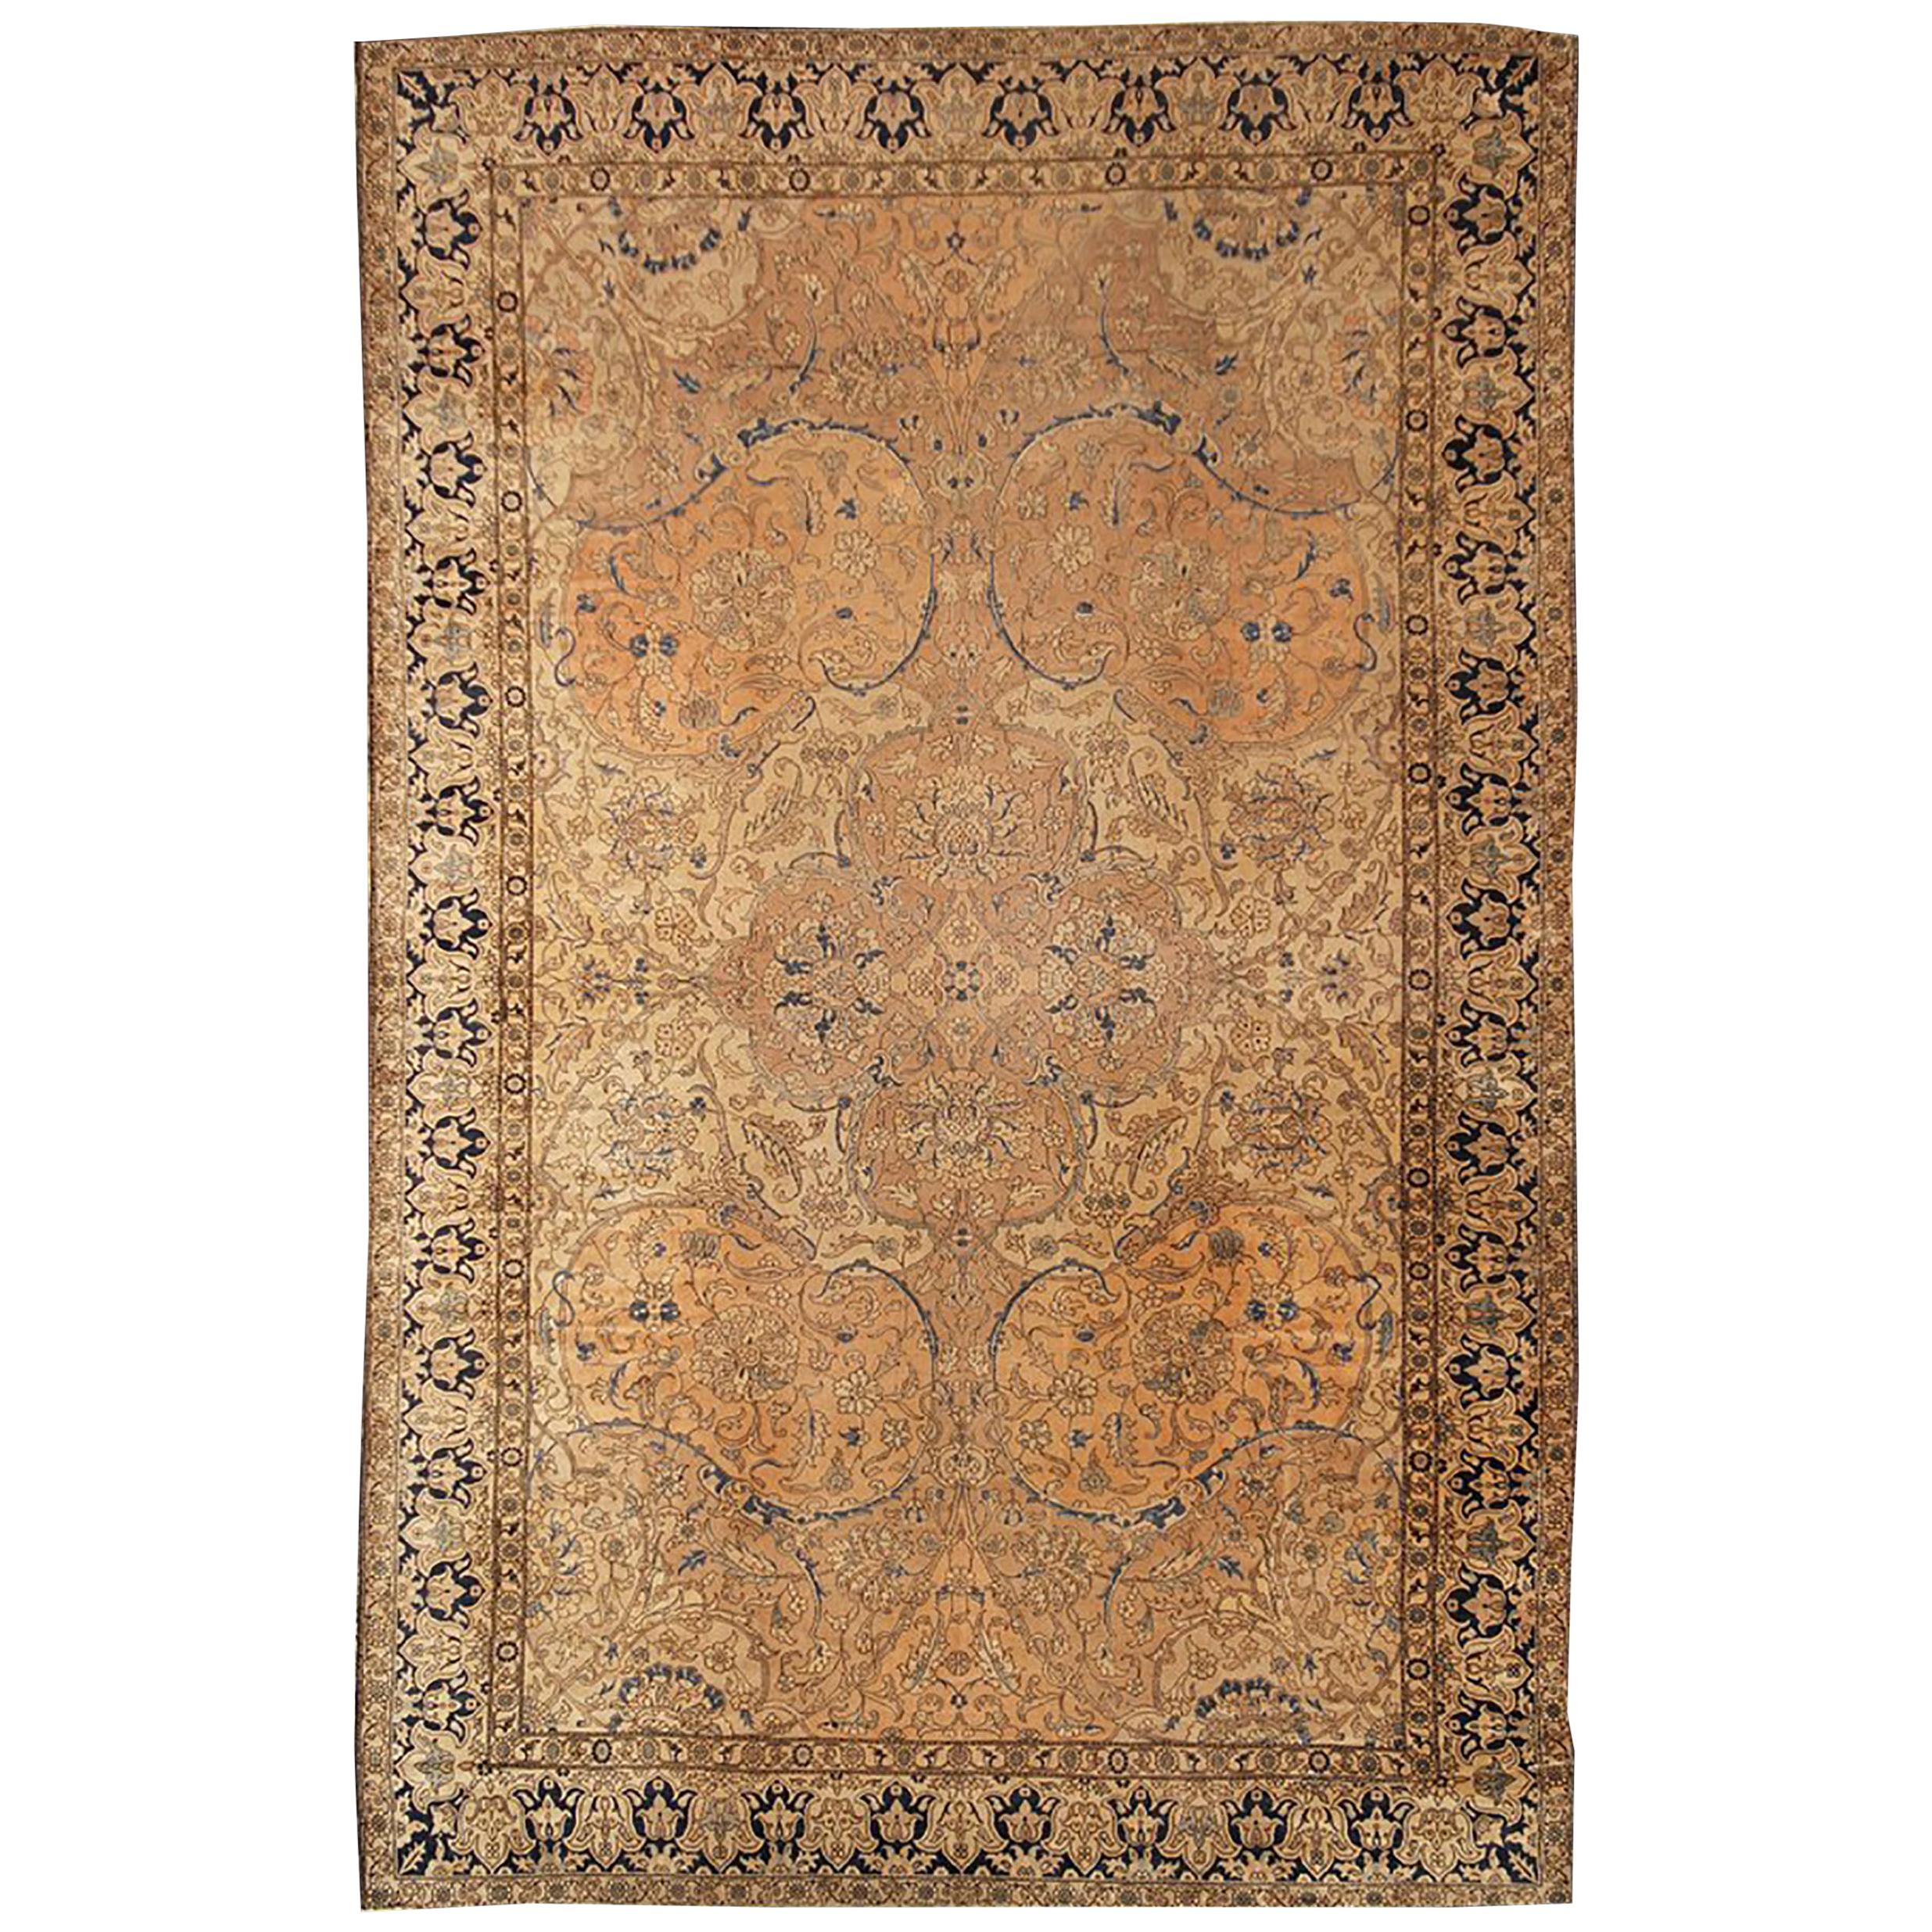 Hand Knotted Antique Polonaise Rug in Beige Brown Floral Pattern by Rug & Kilim